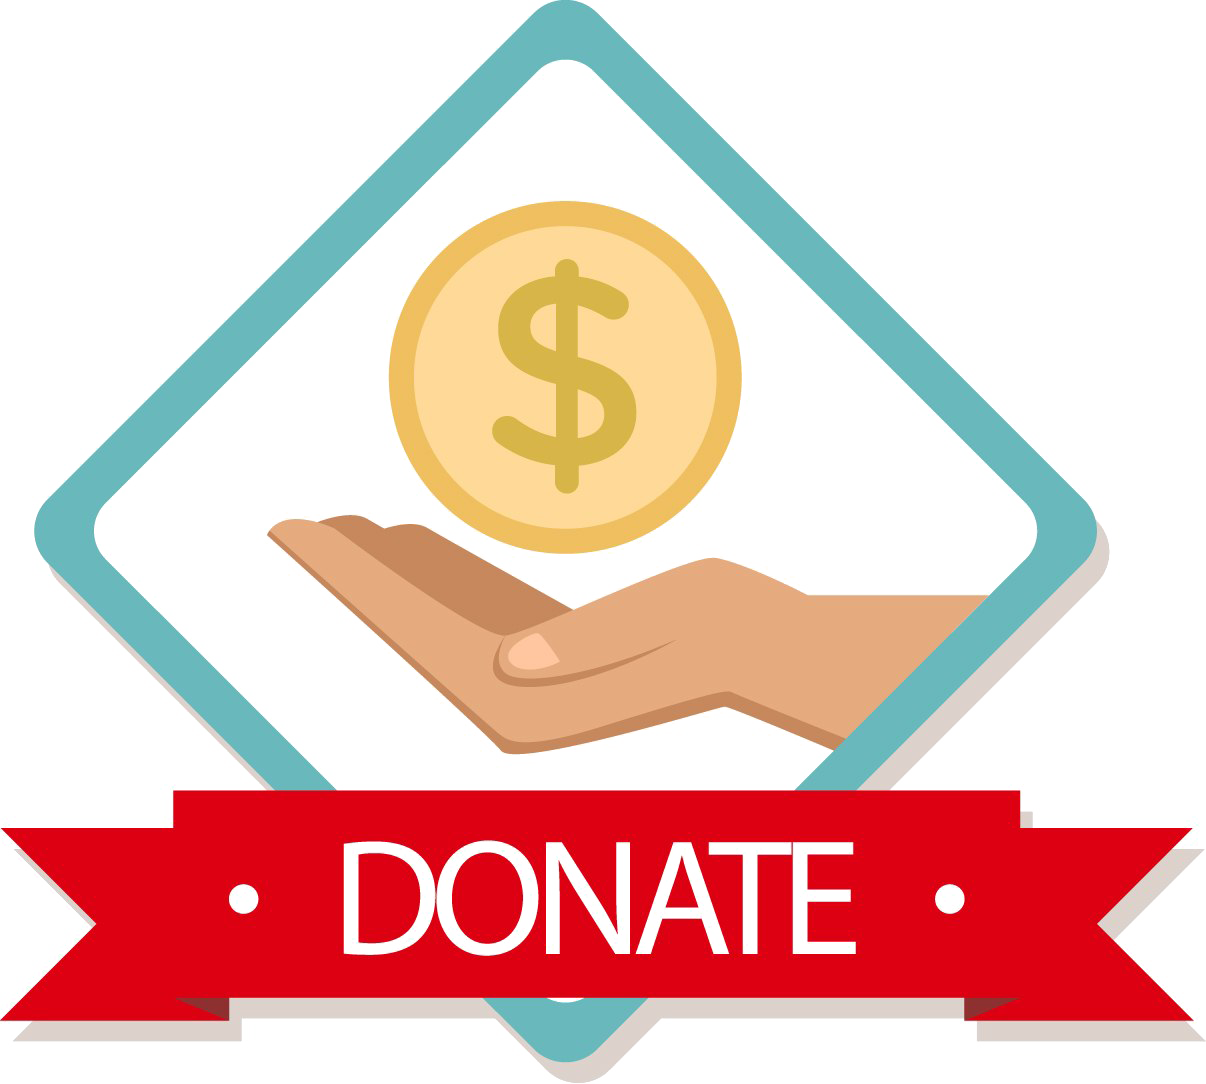 Download Donate Free Clipart HQ HQ PNG Image.